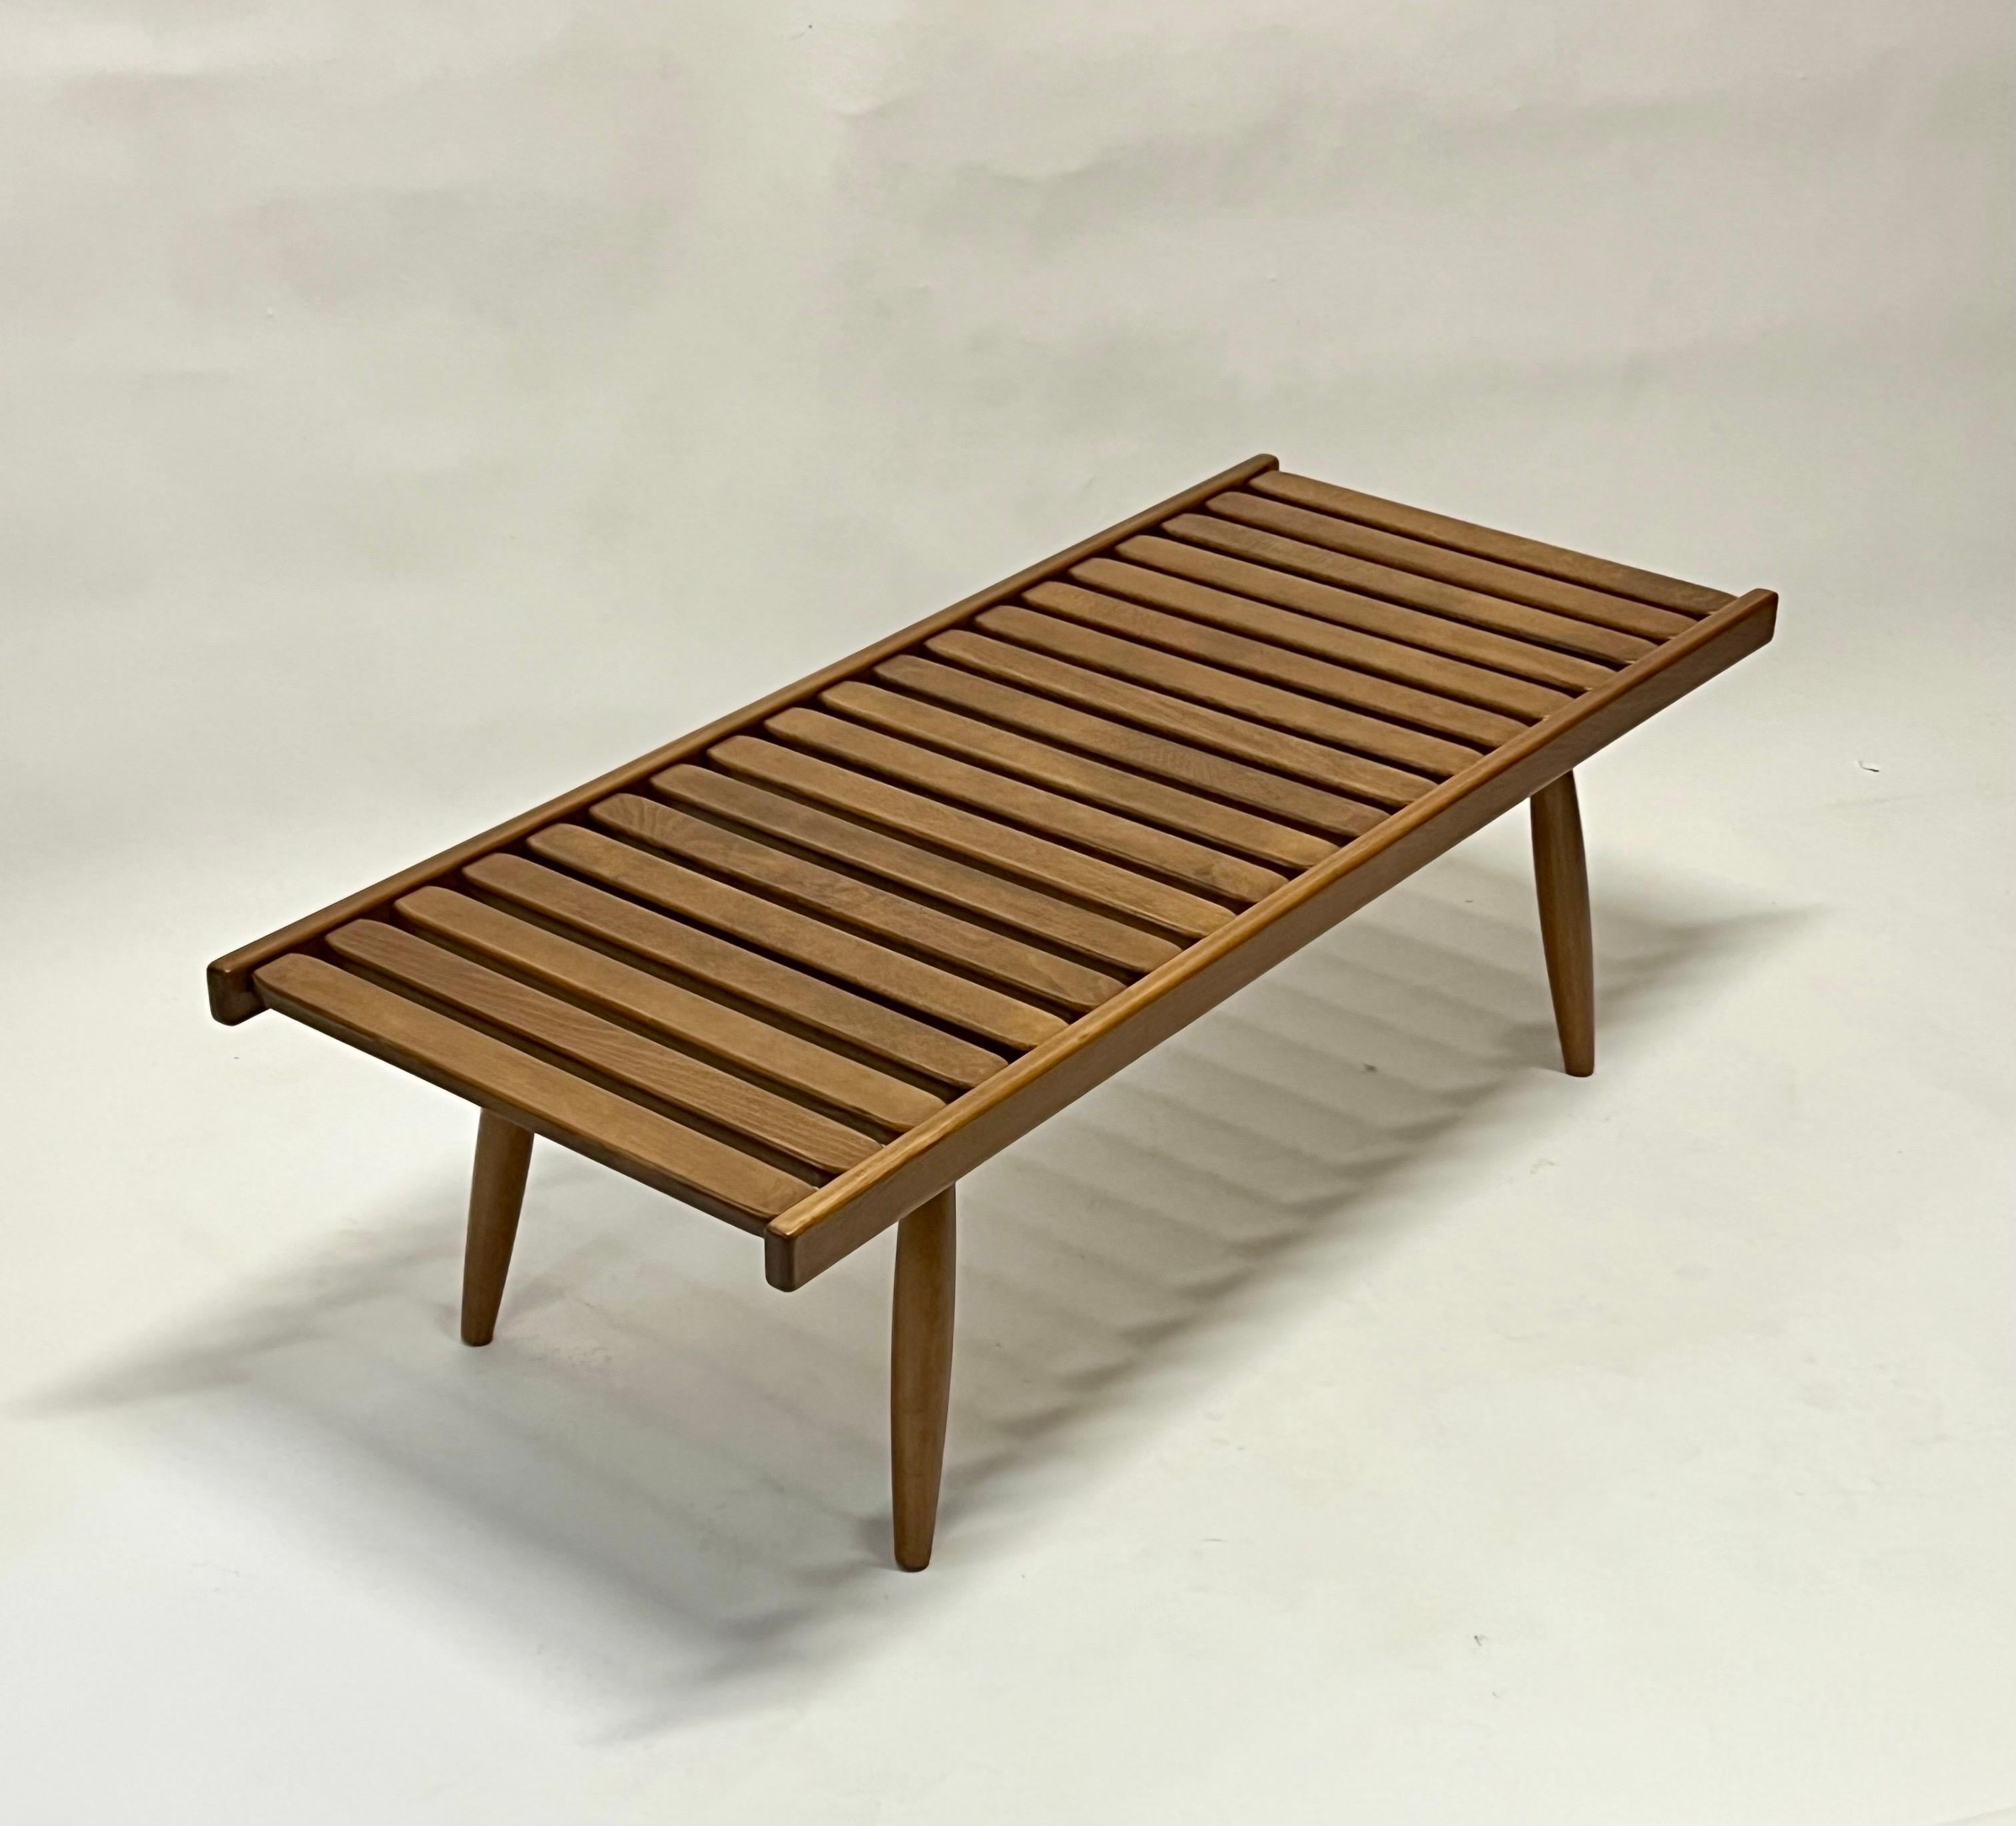 Wonderful vintage modernist wood slat coffee table designed and manufactured in Japan c1960s. Legs easily unscrew for shipping and storage. 